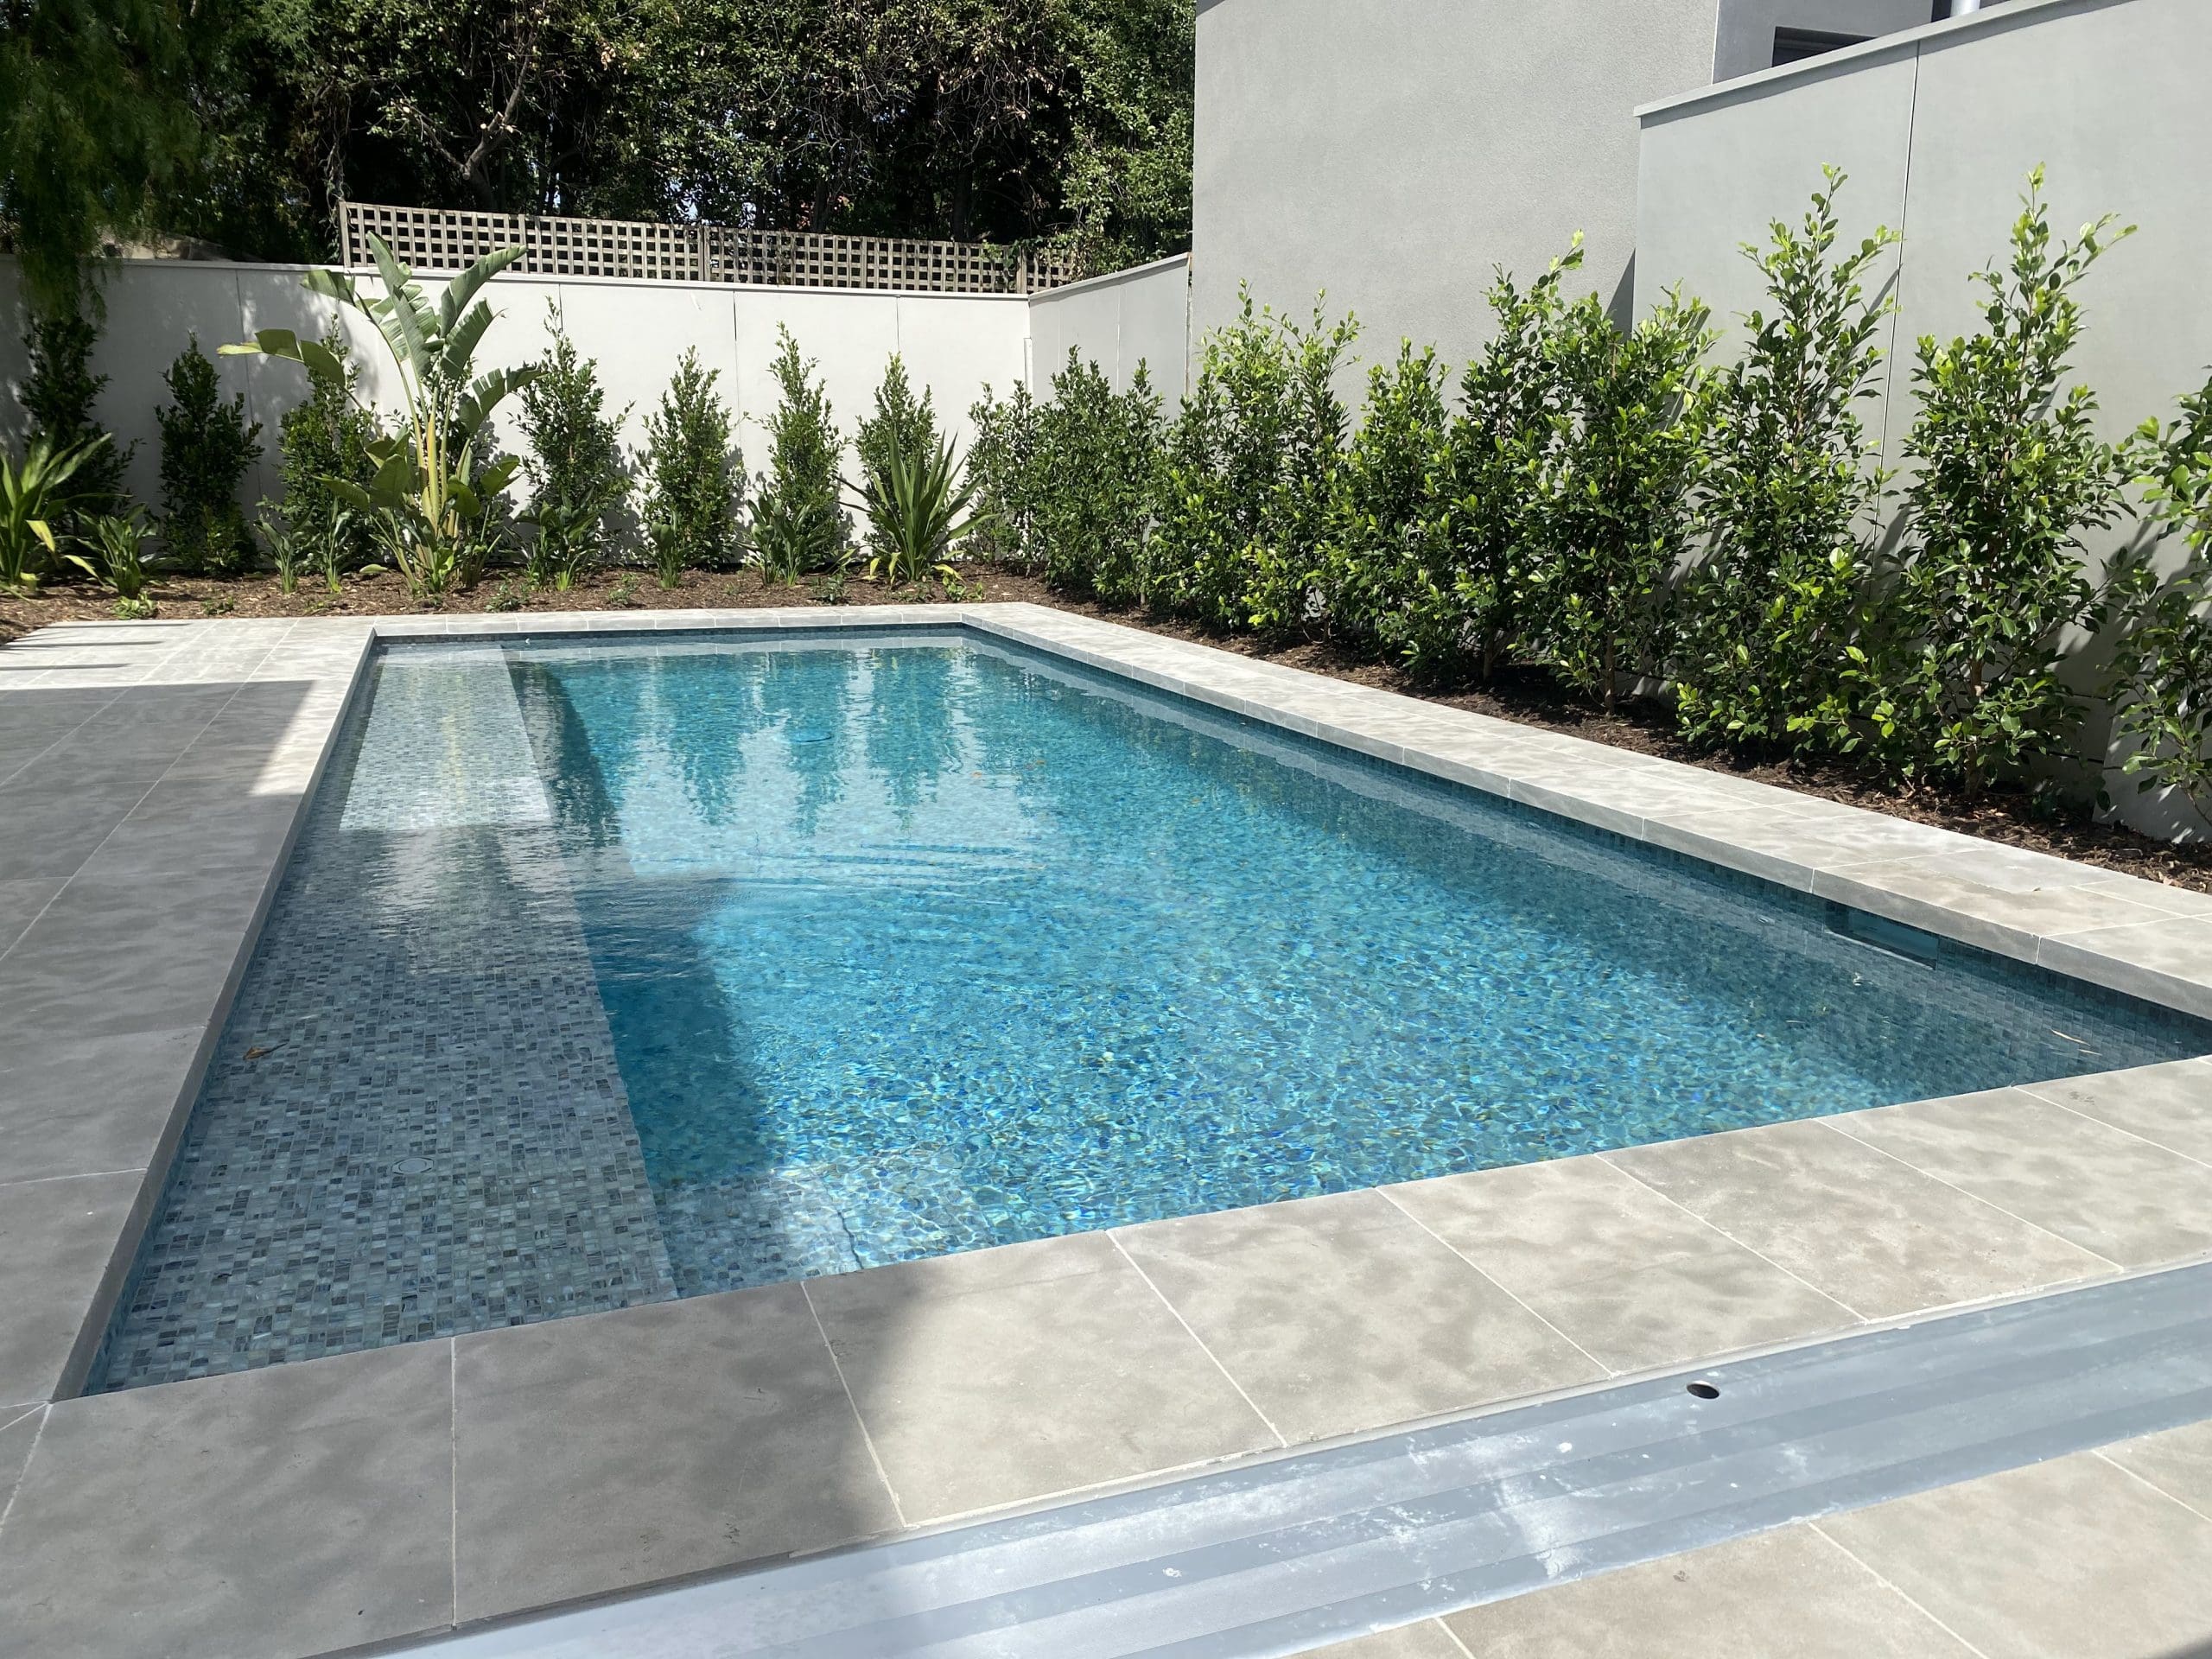 MADDISON BRUSHED & TUMBLED LIMESTONE_RMS TRADERS_NATURAL STONE GREY PAVERS POOL COPING TILES SUPPLIER MELBOURNE (292)14